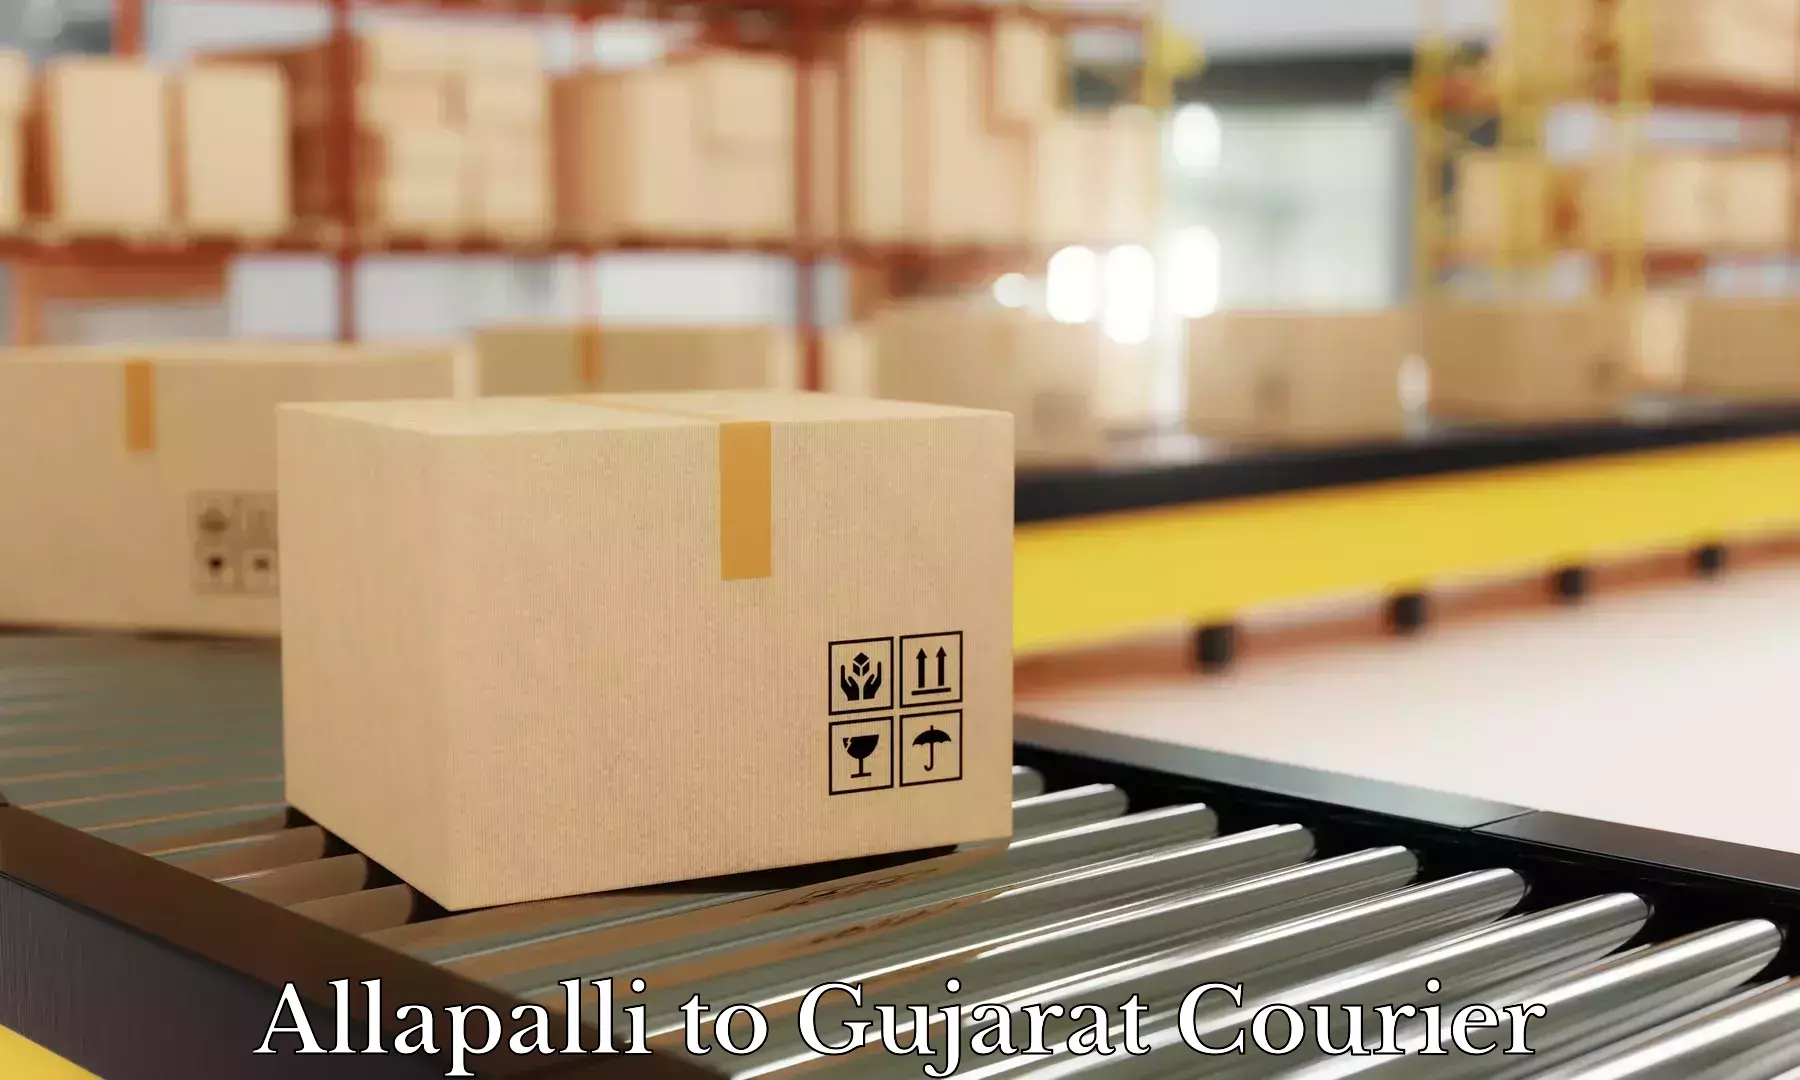 Instant baggage transport quote Allapalli to Gujarat